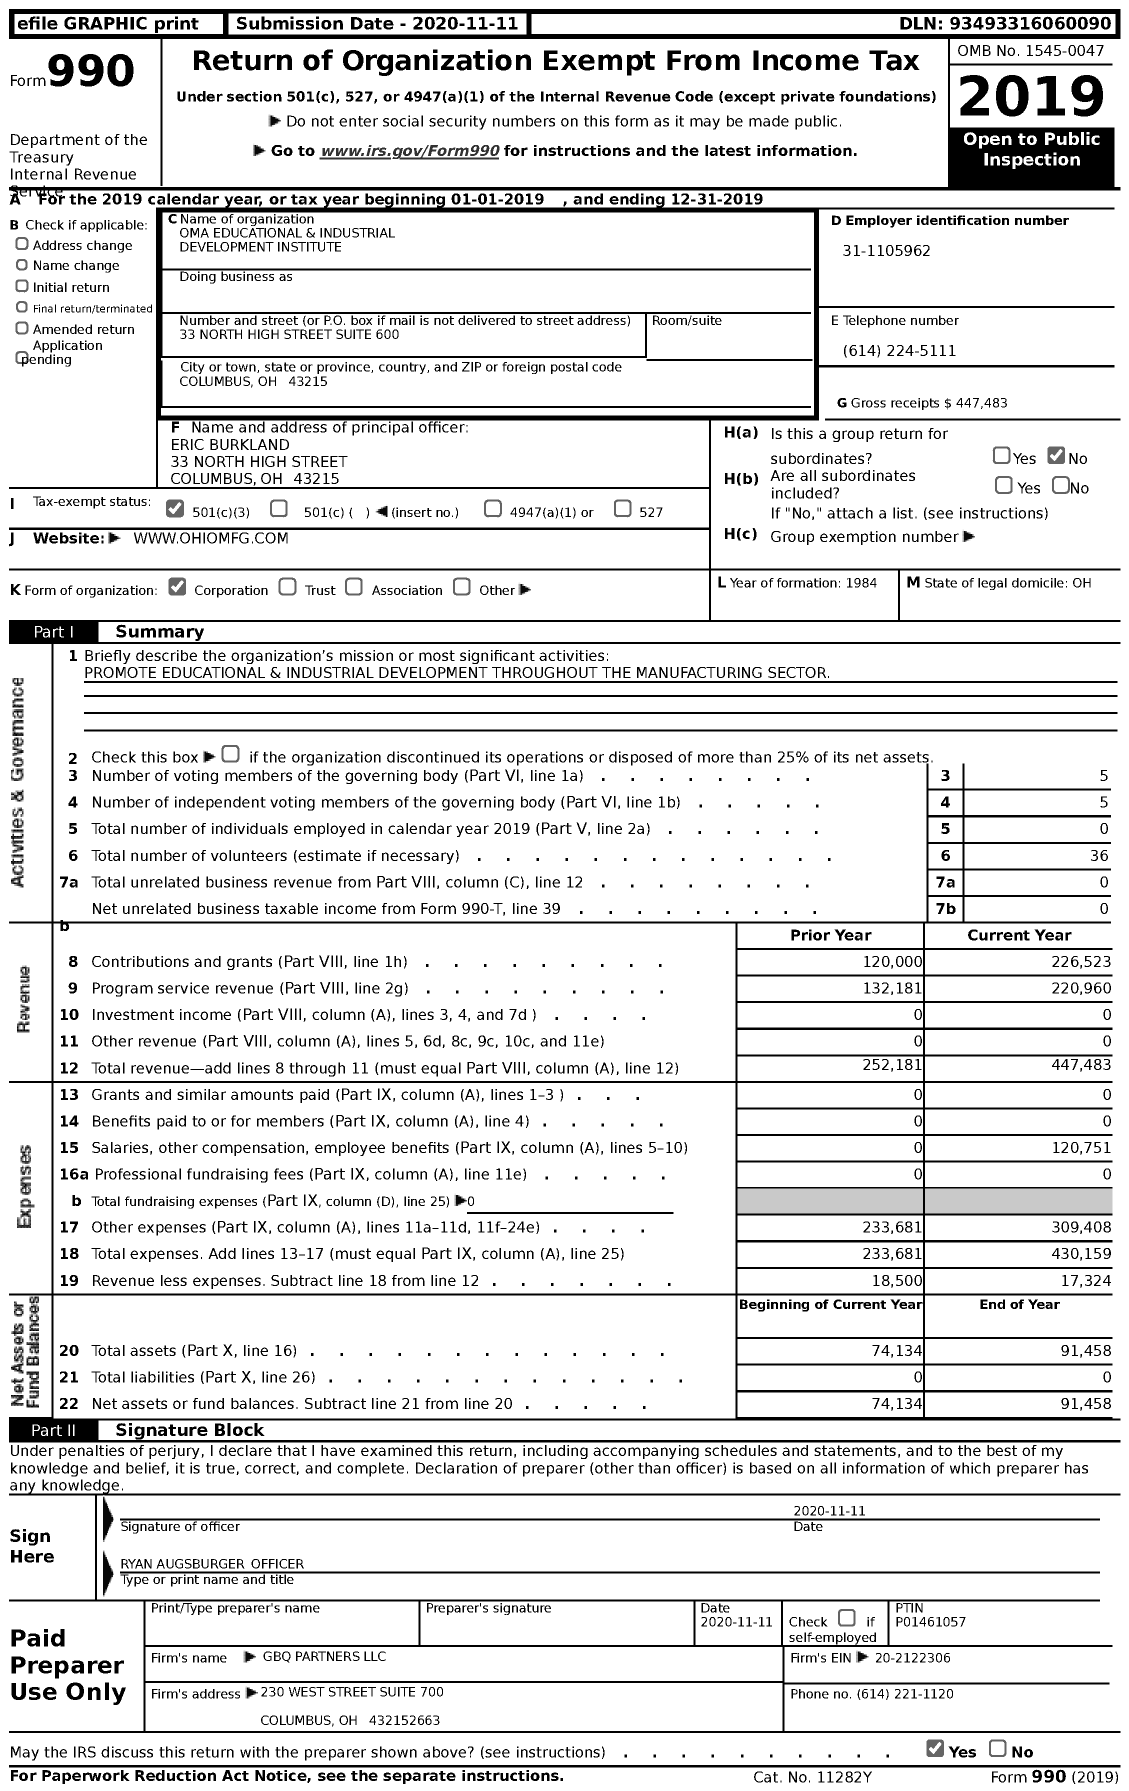 Image of first page of 2019 Form 990 for Oma Educational and Industrial Development Institute